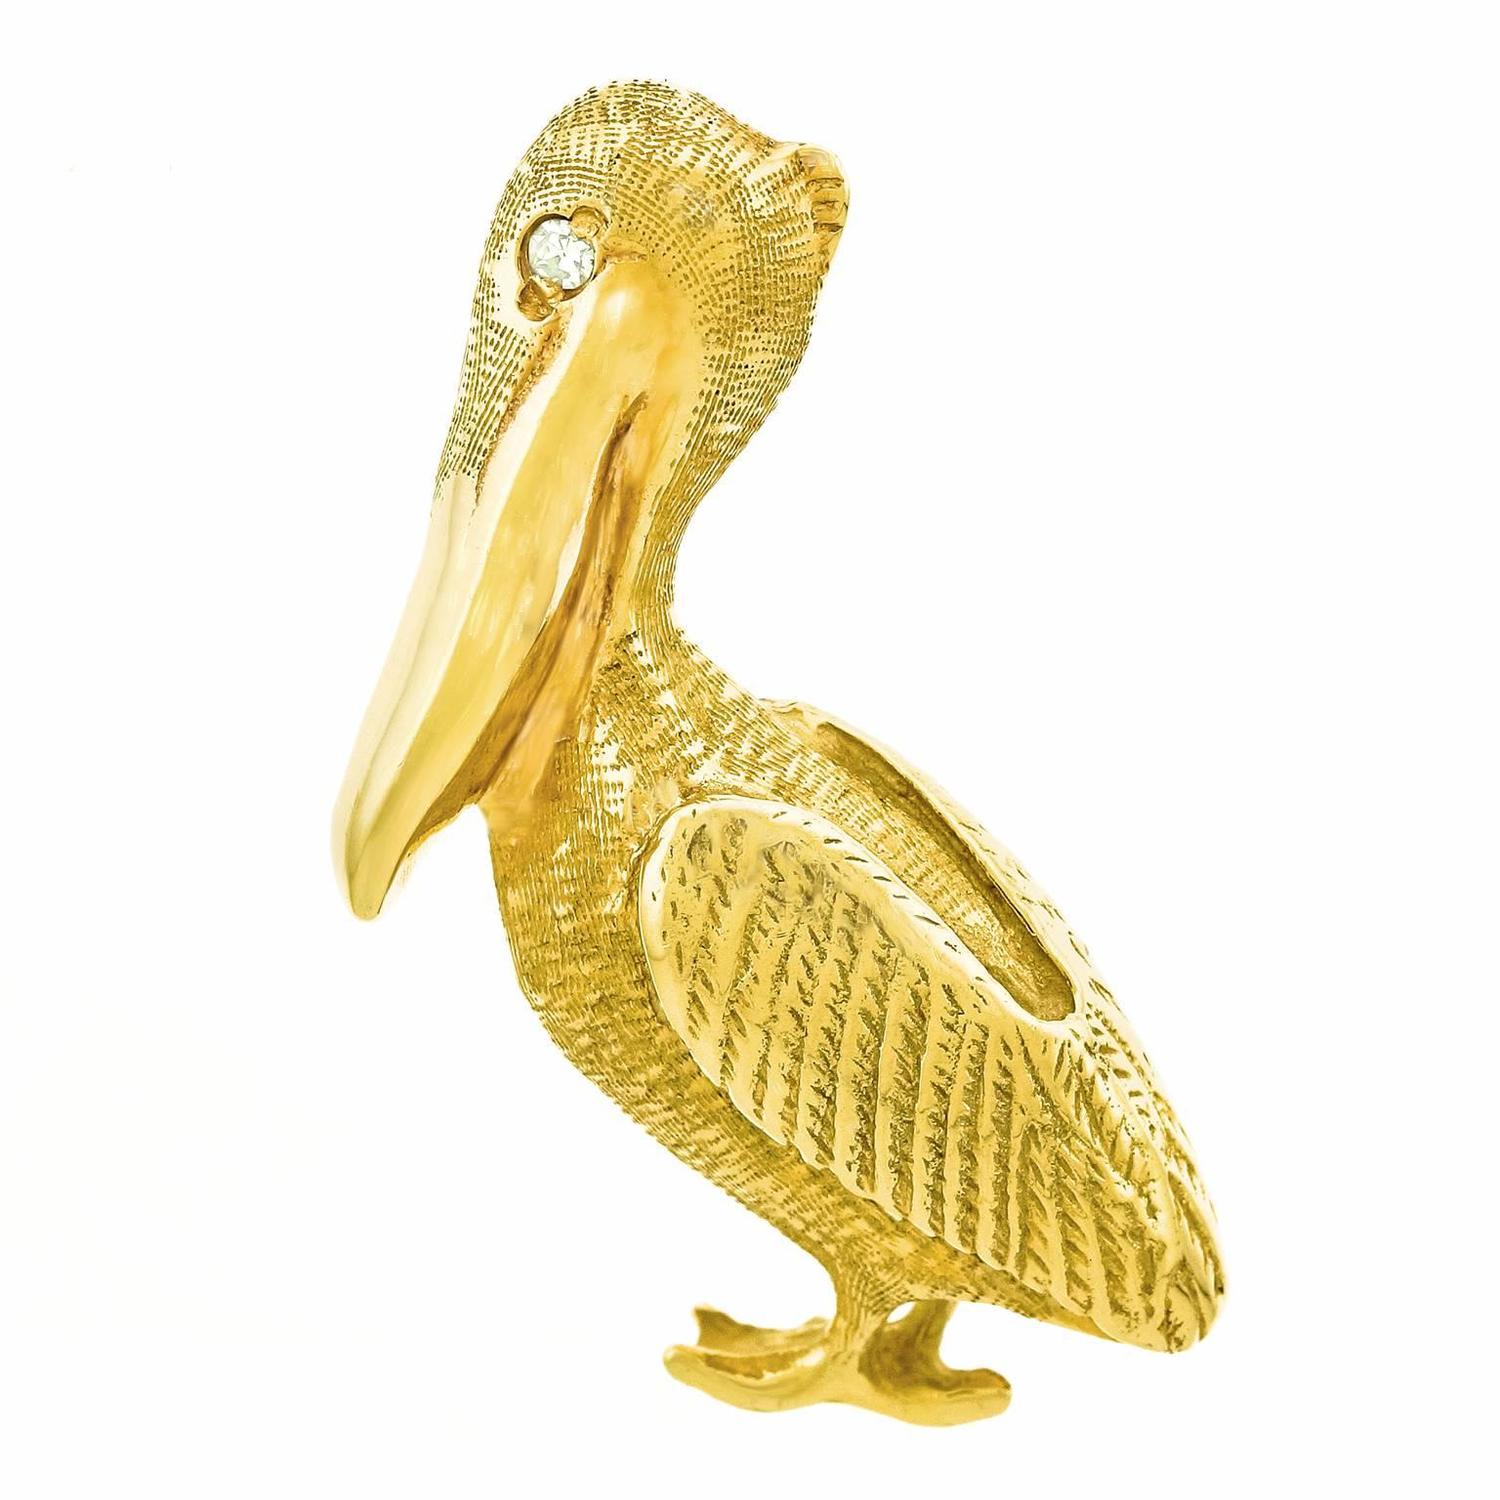 1930s Diamond Gold Pelican Brooch For Sale at 1stdibs